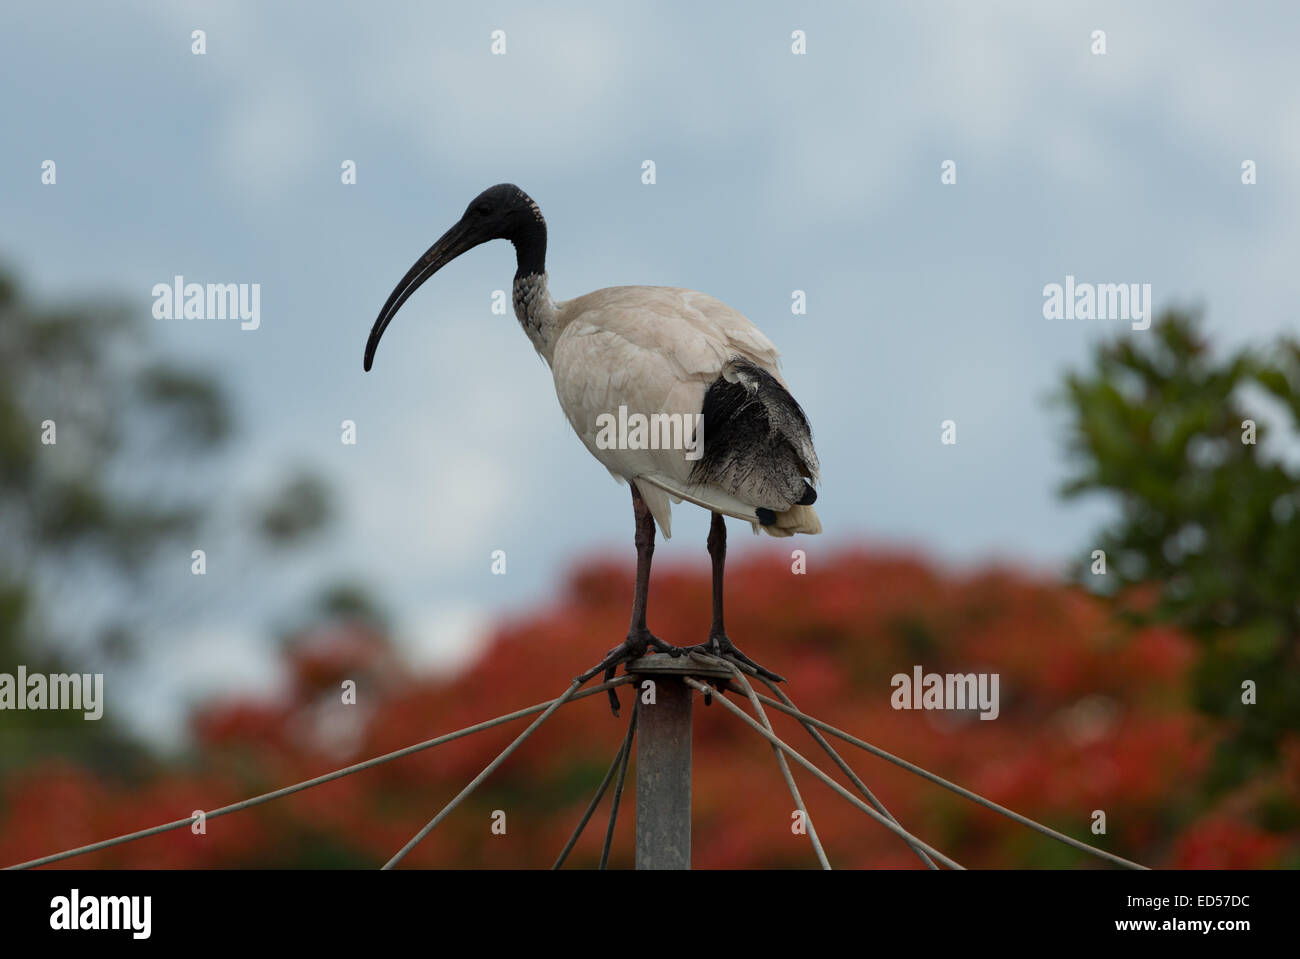 A photograph of an Australian White Ibis sitting on a backyard clothesline. The photograph was taken in northern NSW, Australia. Stock Photo